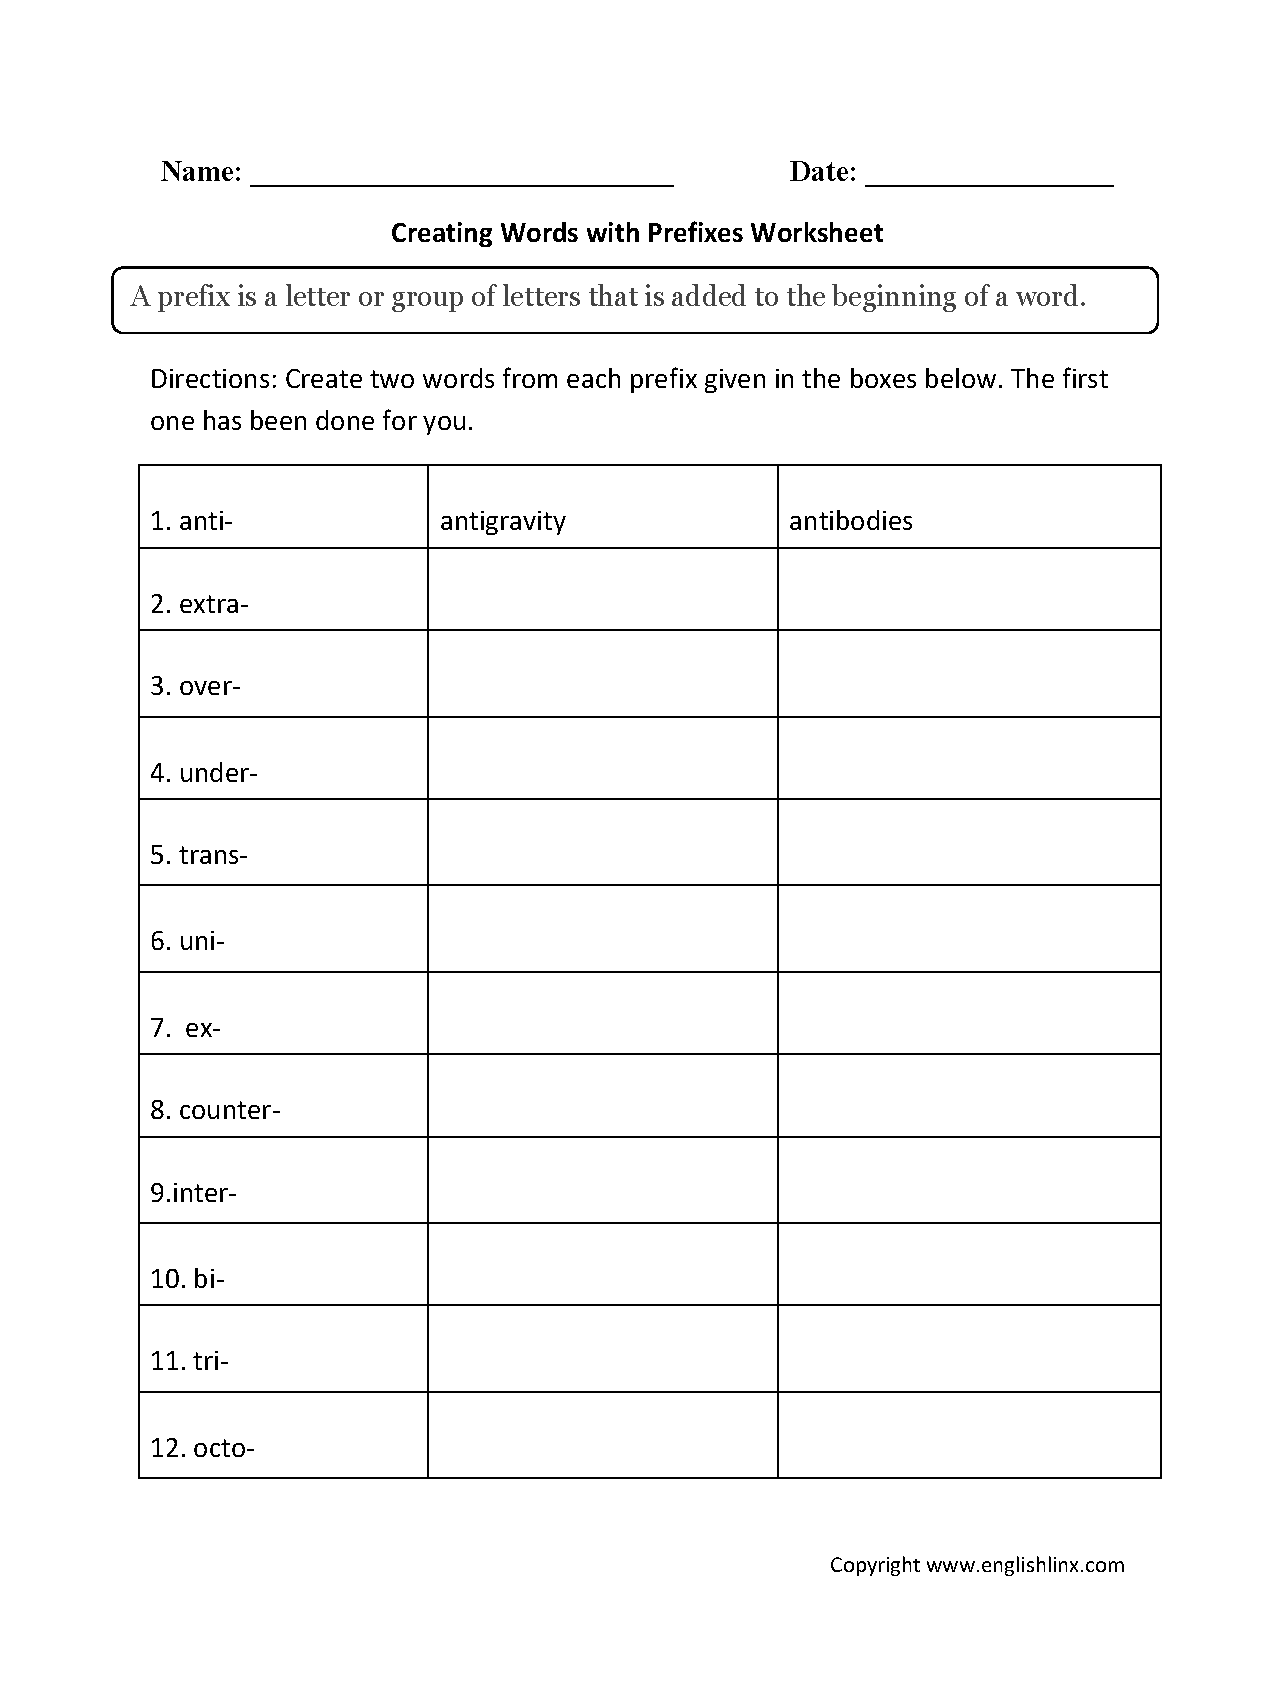 Creating Words with Prefixes Worksheets